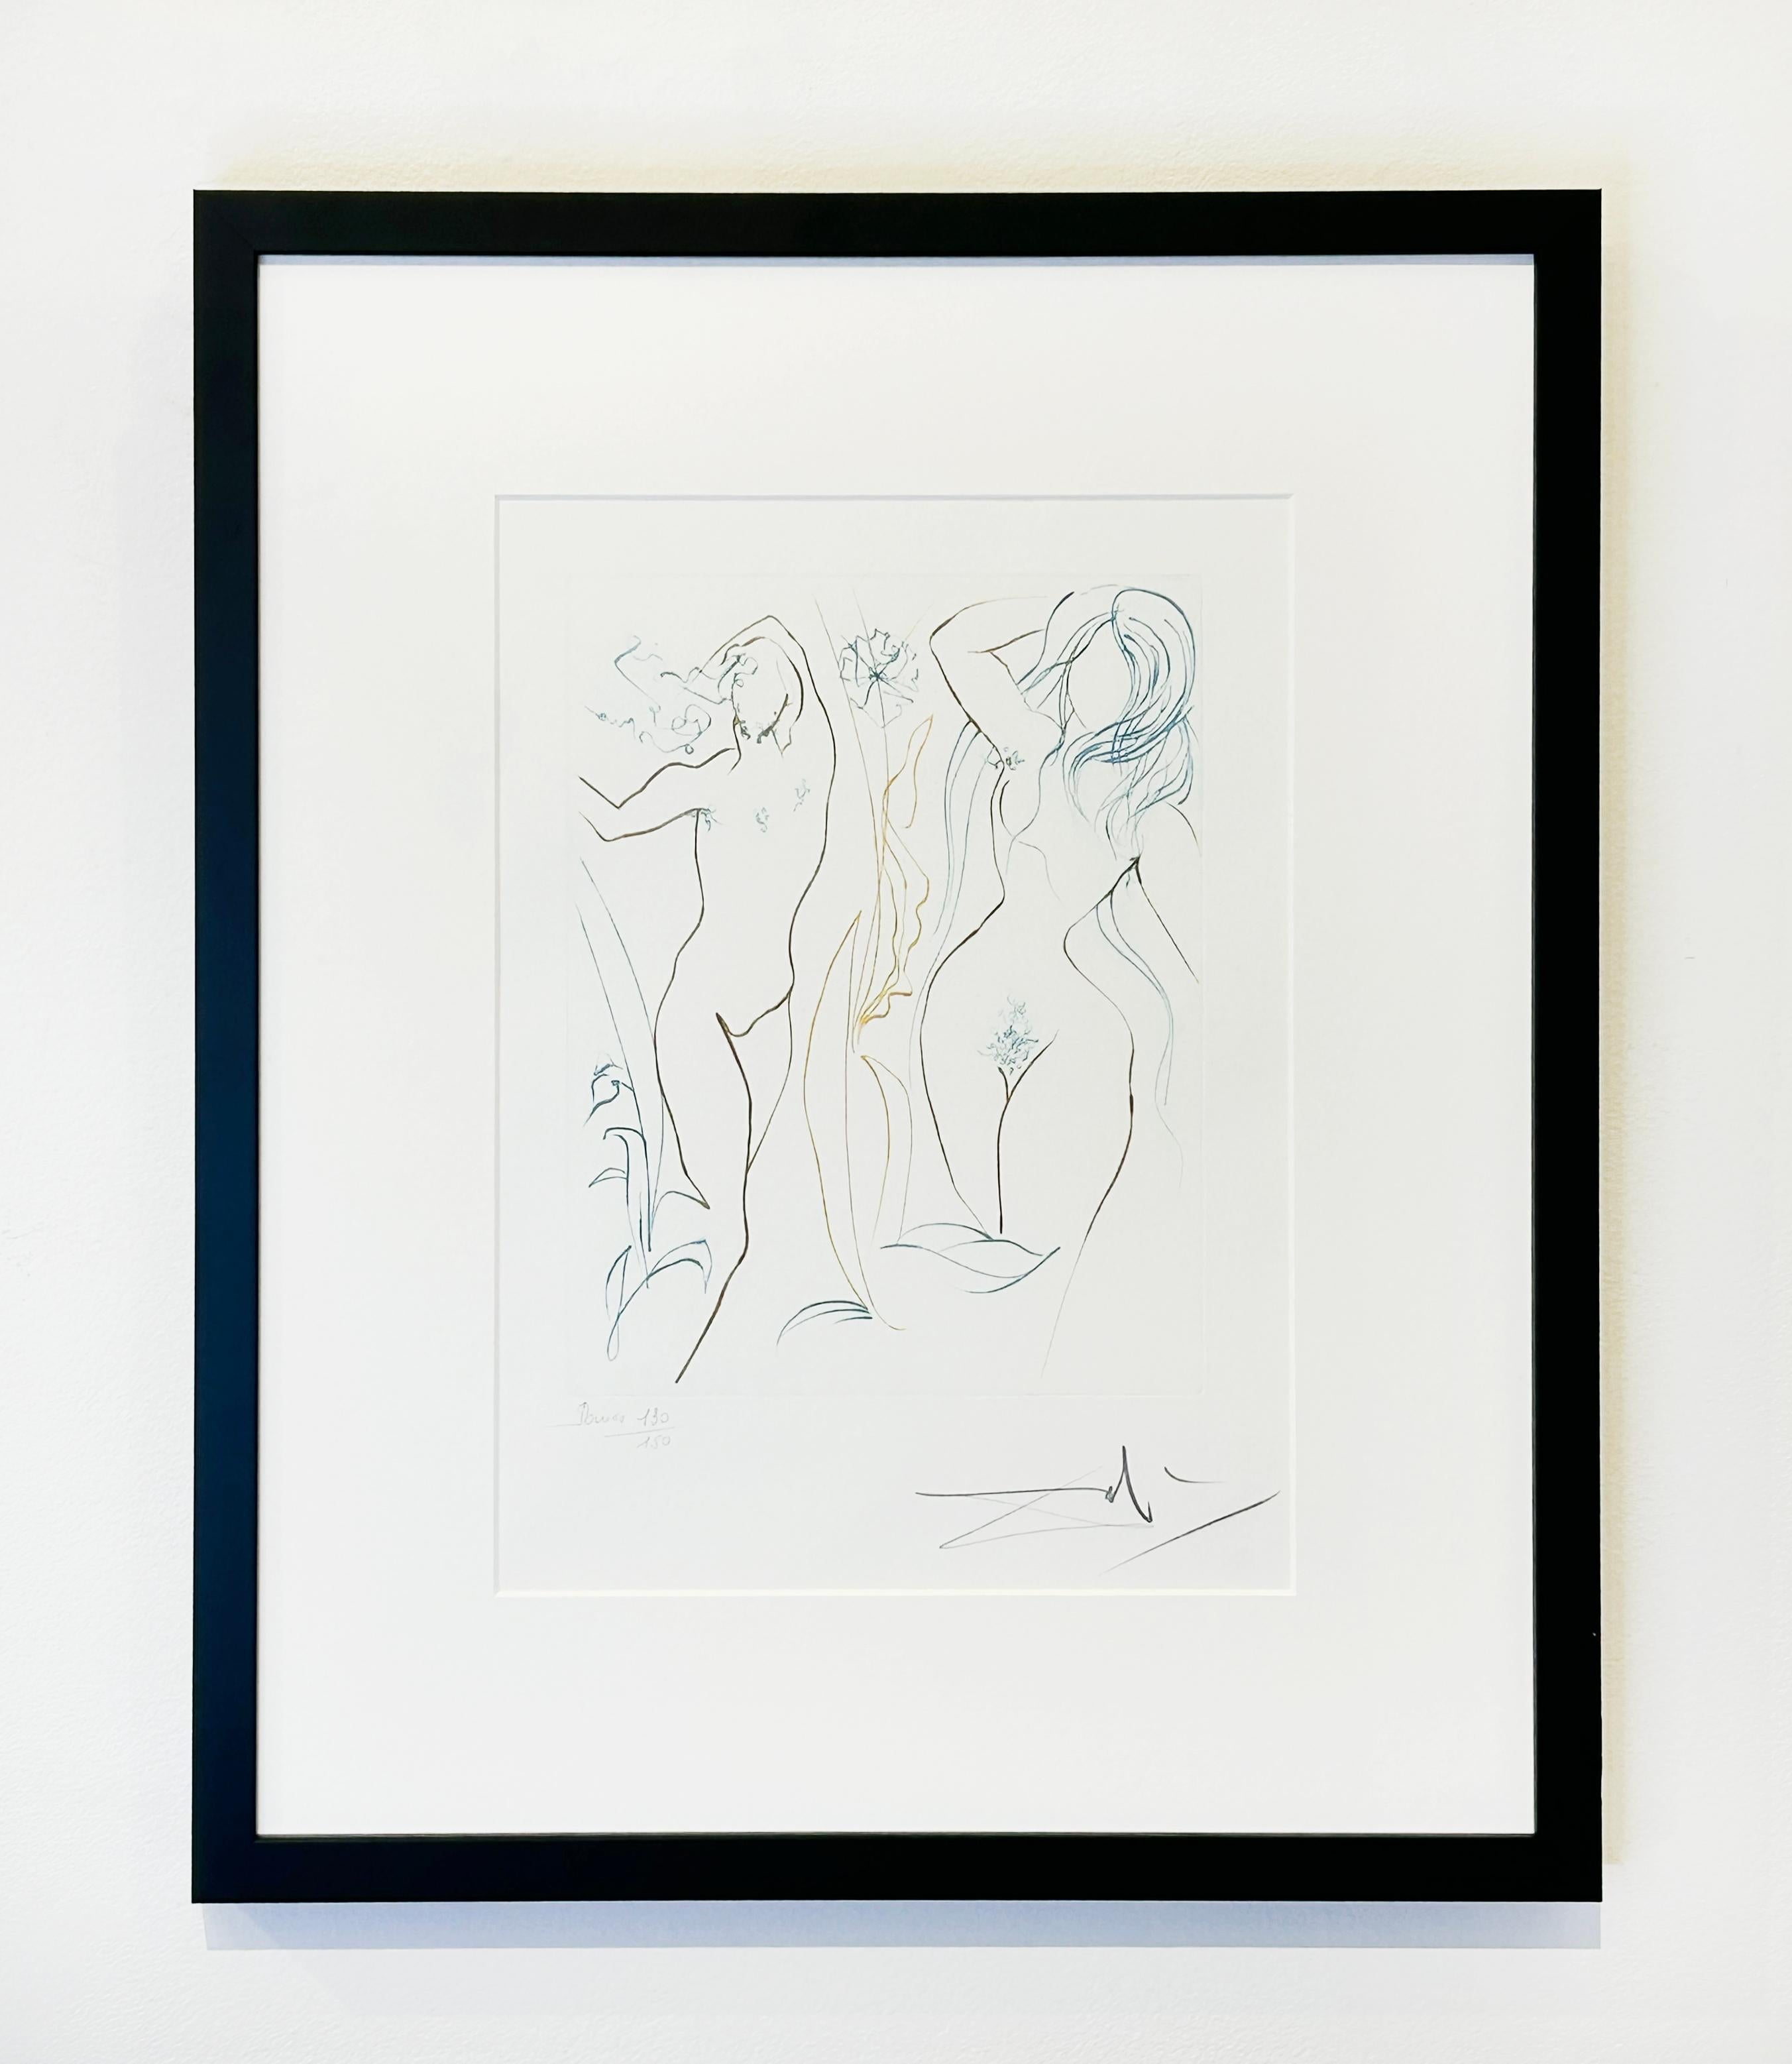 Adam and Eve - Surrealist Print by Salvador Dalí